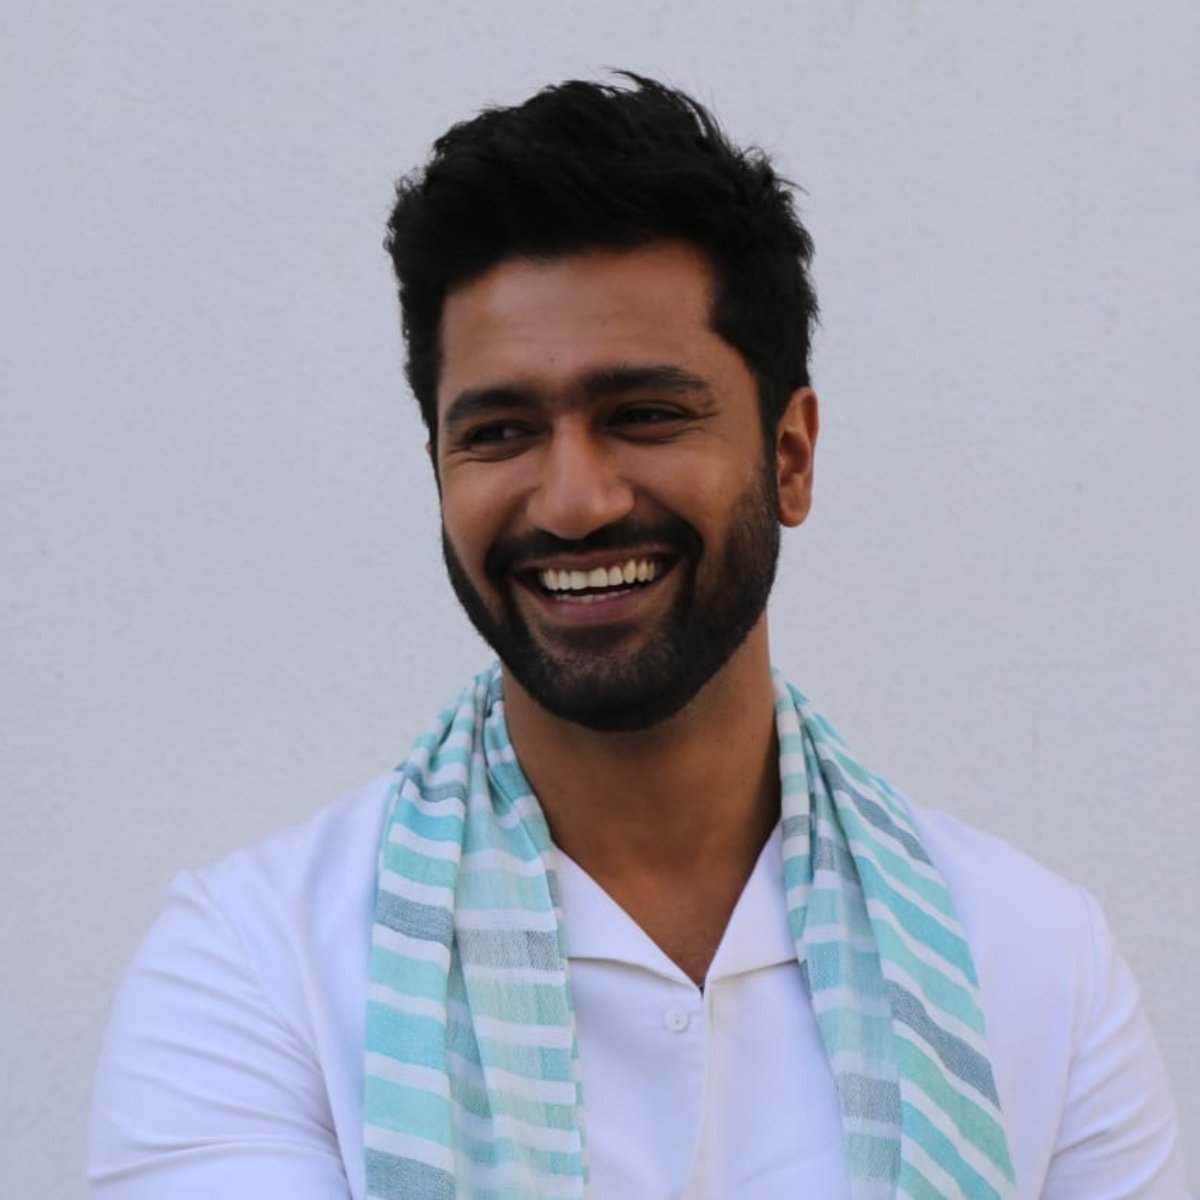 EXCLUSIVE: Vicky Kaushal in talks for Shah Rukh Khan’s next with ...